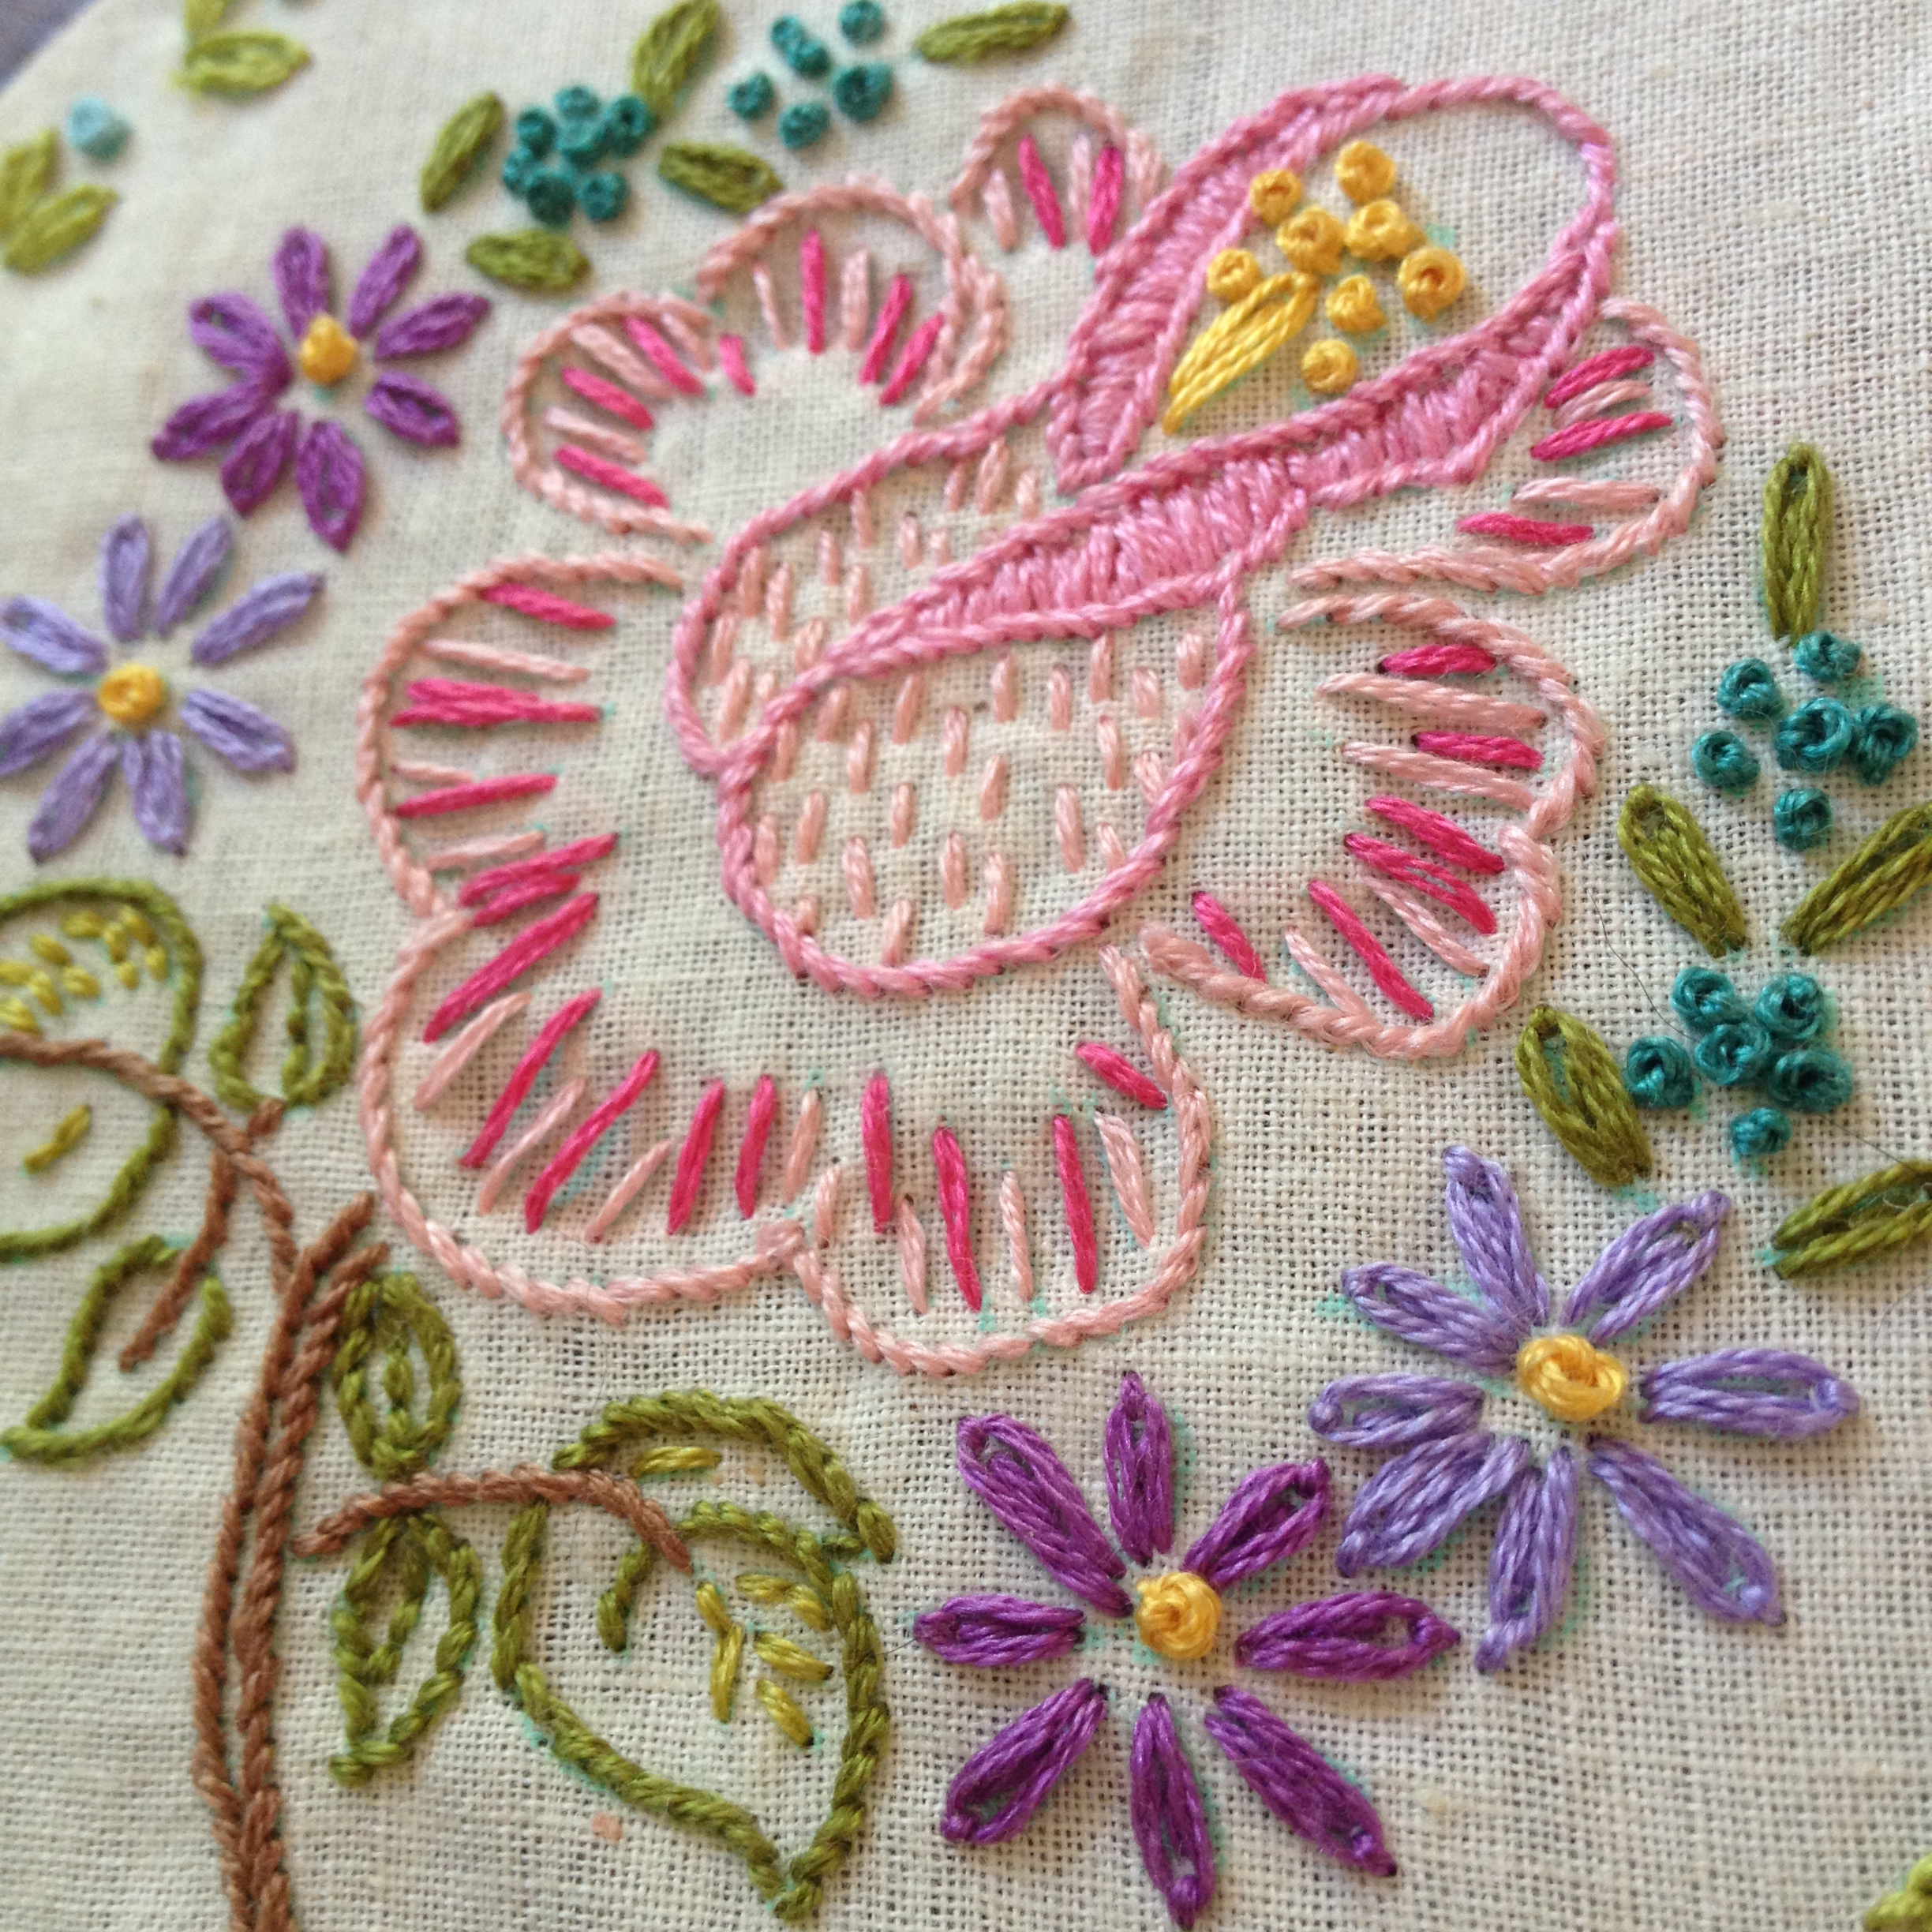 New Hand Embroidery Patterns Vintage Hand Embroidery Patterns My Original Inspiration In The